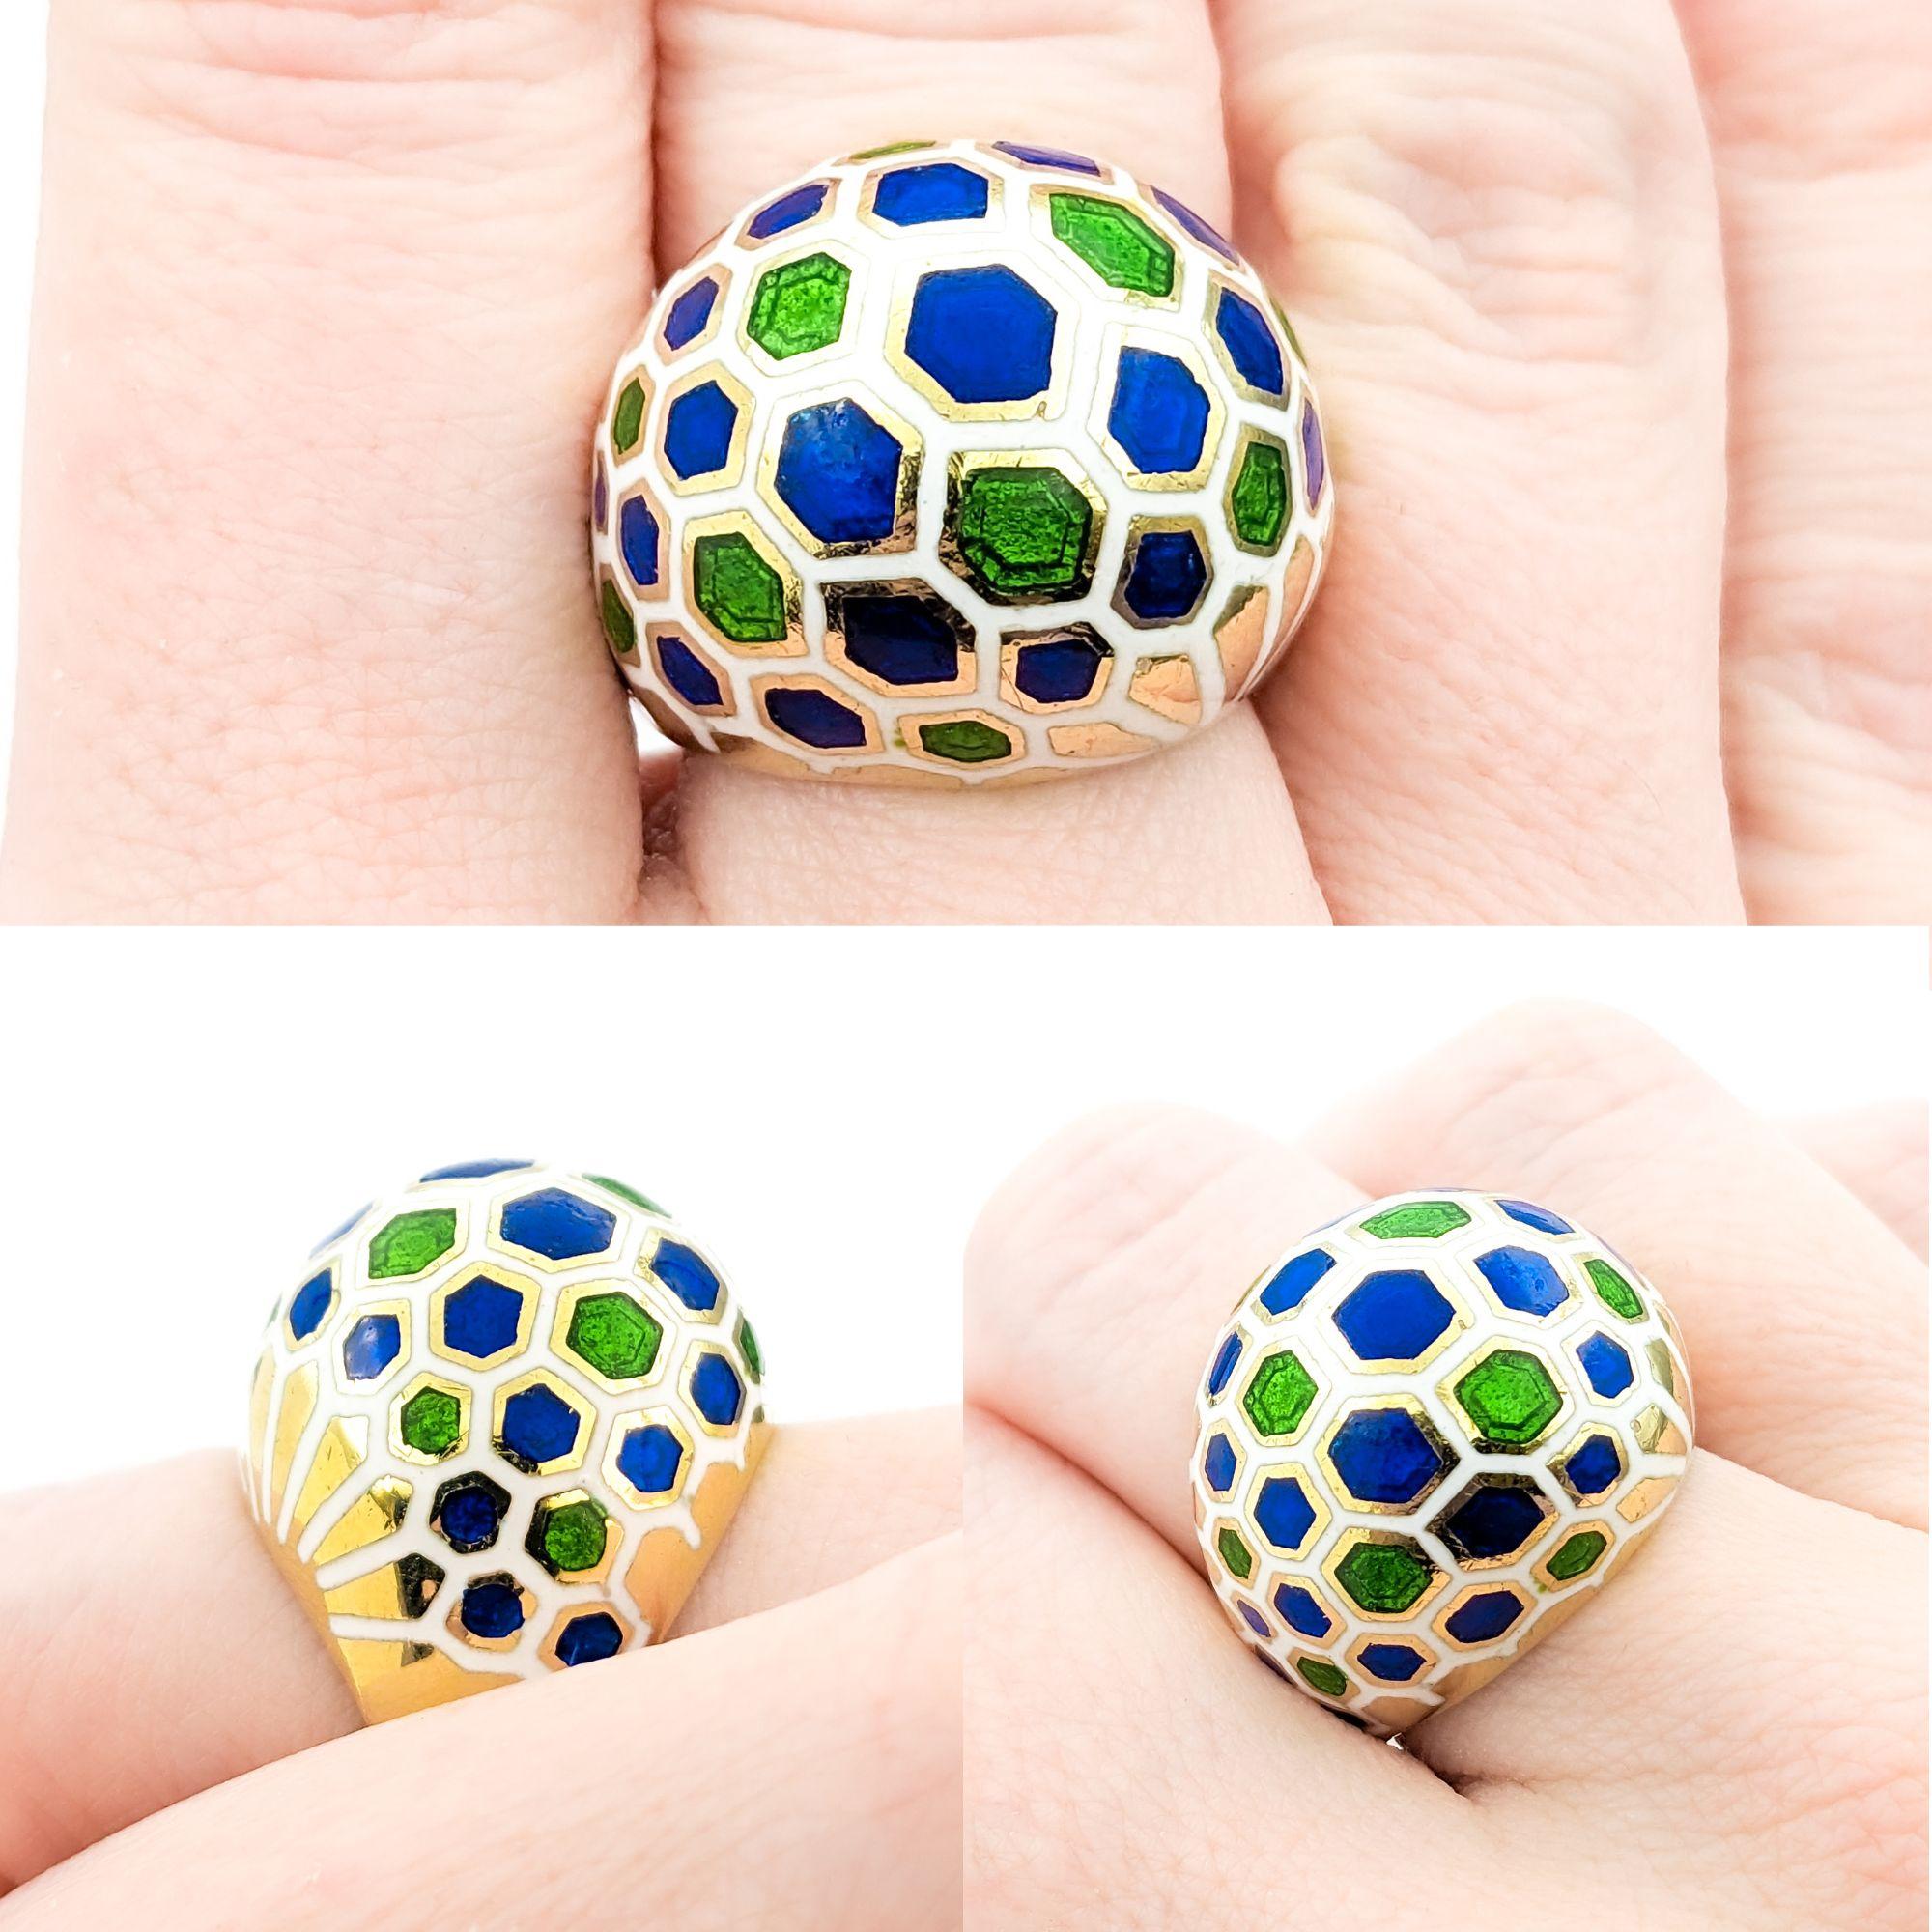 Unique Design With Enameled Hexagons Ring In Yellow Gold

This remarkable enamel ring, meticulously crafted in 18k yellow gold, showcases a unique design with enameled hexagons, presenting a modern take on geometric elegance. The enchanting